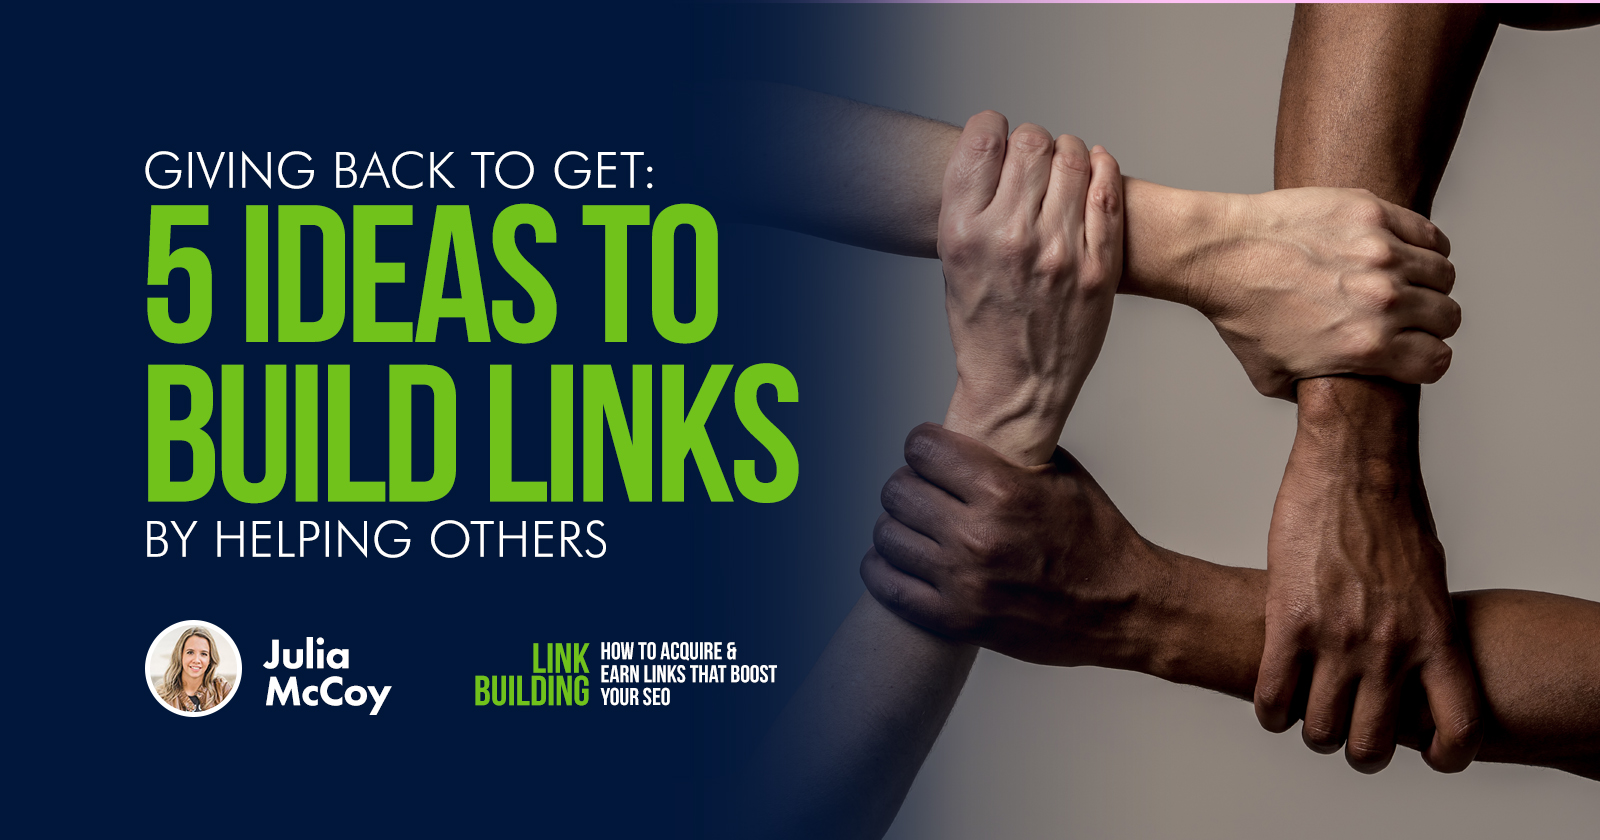 LB Guide - Giving Back to Get - 5 Ideas to Build Links by Helping Others - Julia McCoy